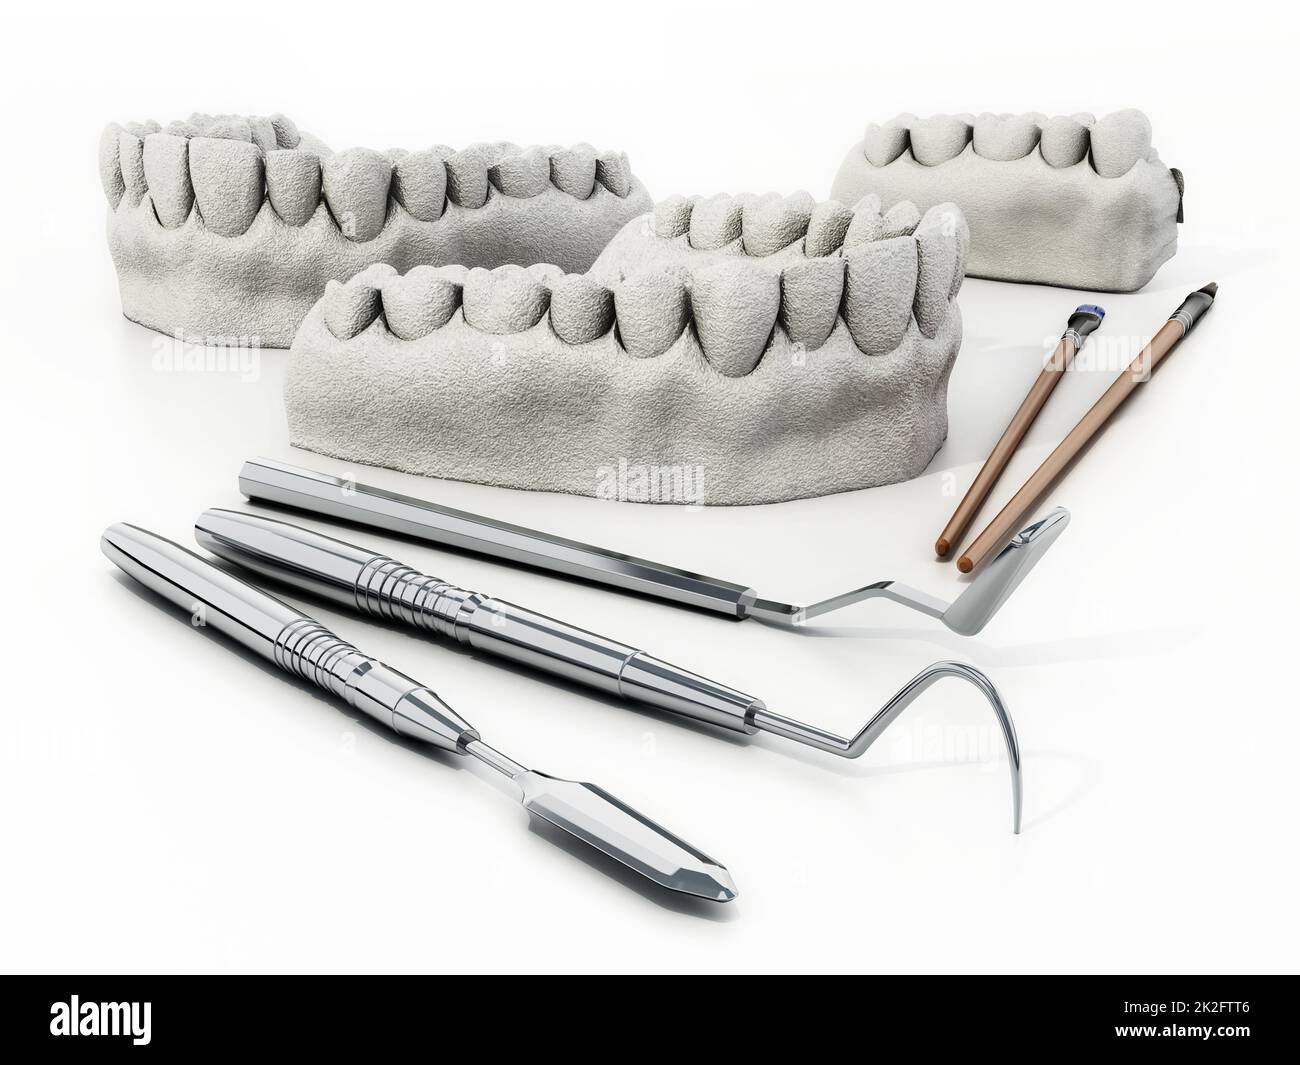 Artificial teeth model,modeling and painting tools isolated on white background. 3D illustration Stock Photo